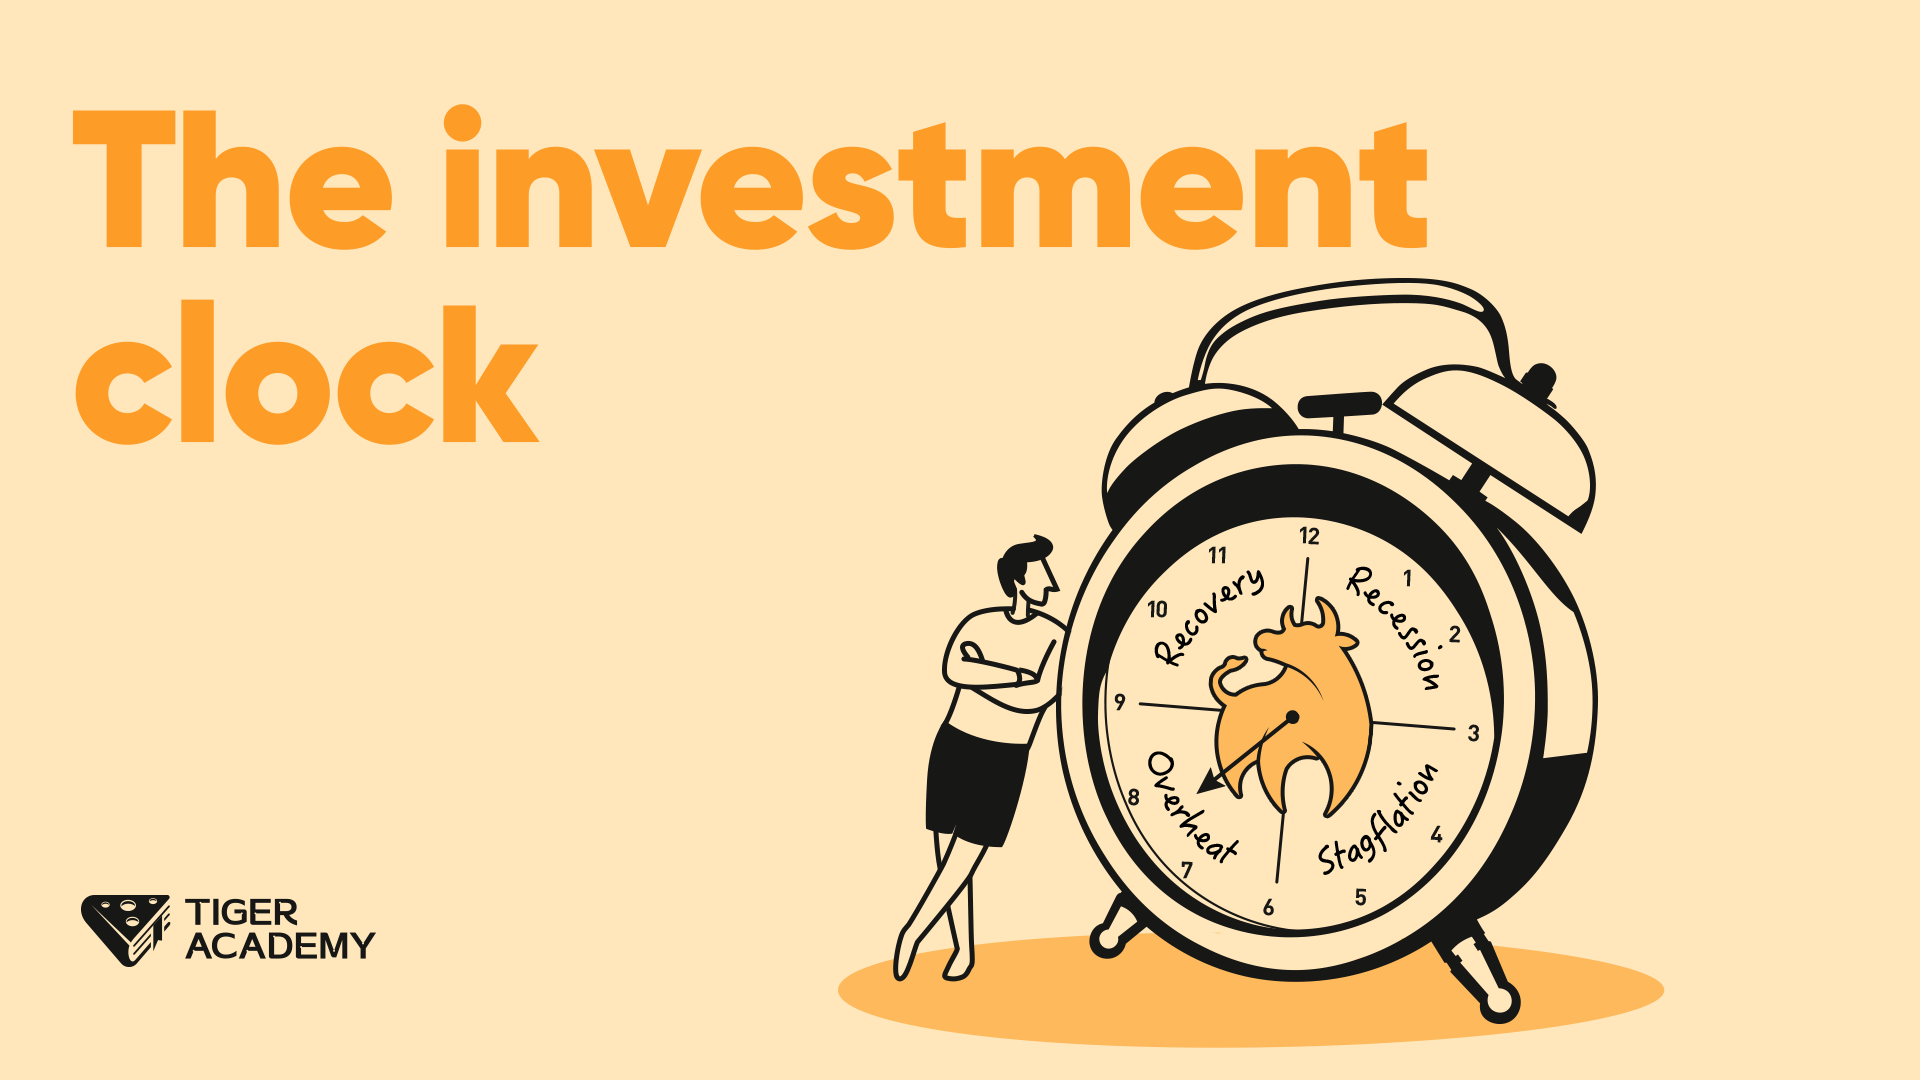 Day56. The investment clock